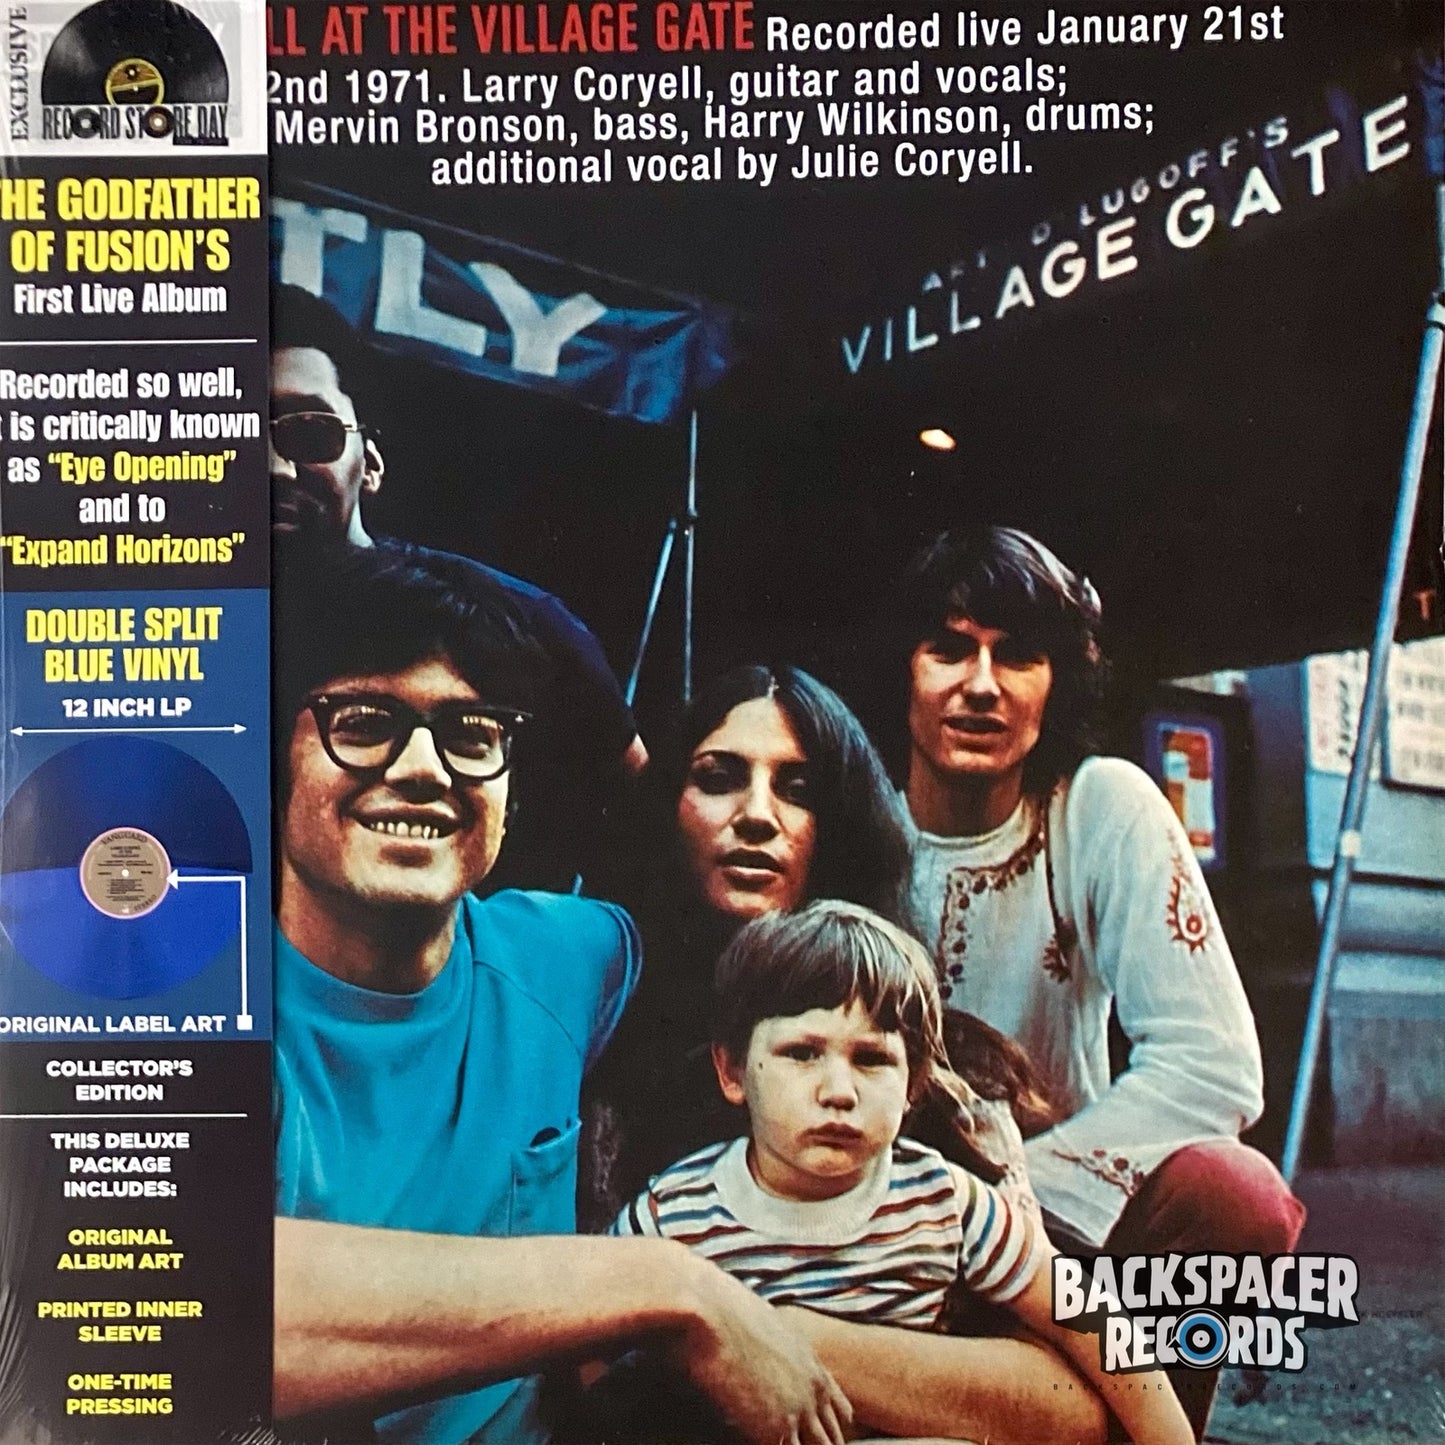 Larry Coryell - At The Village Gate (Limited Edition) LP (Sealed)